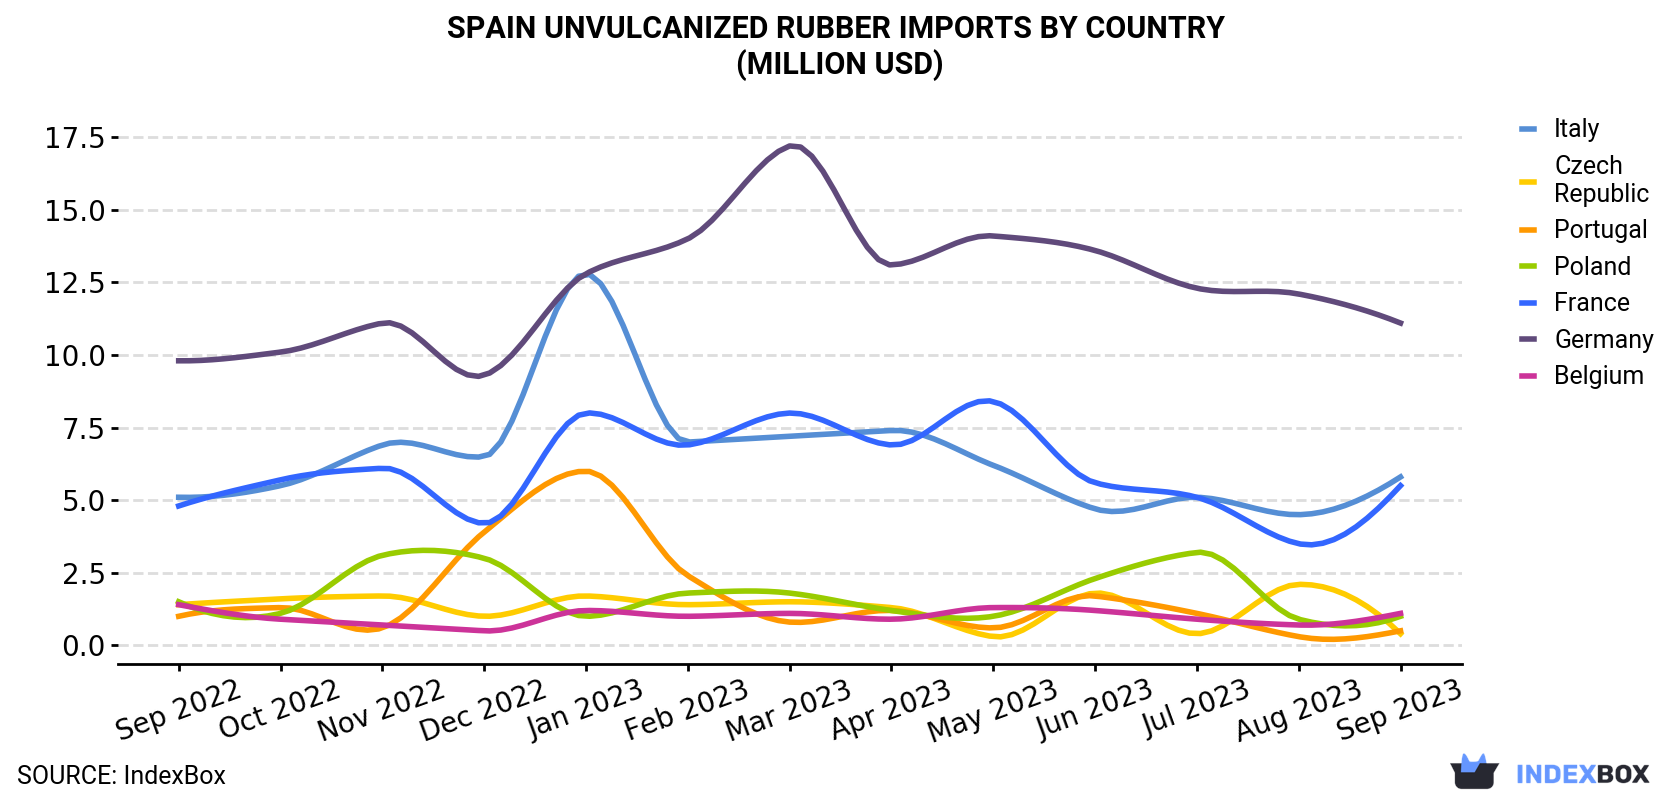 Spain Unvulcanized Rubber Imports By Country (Million USD)